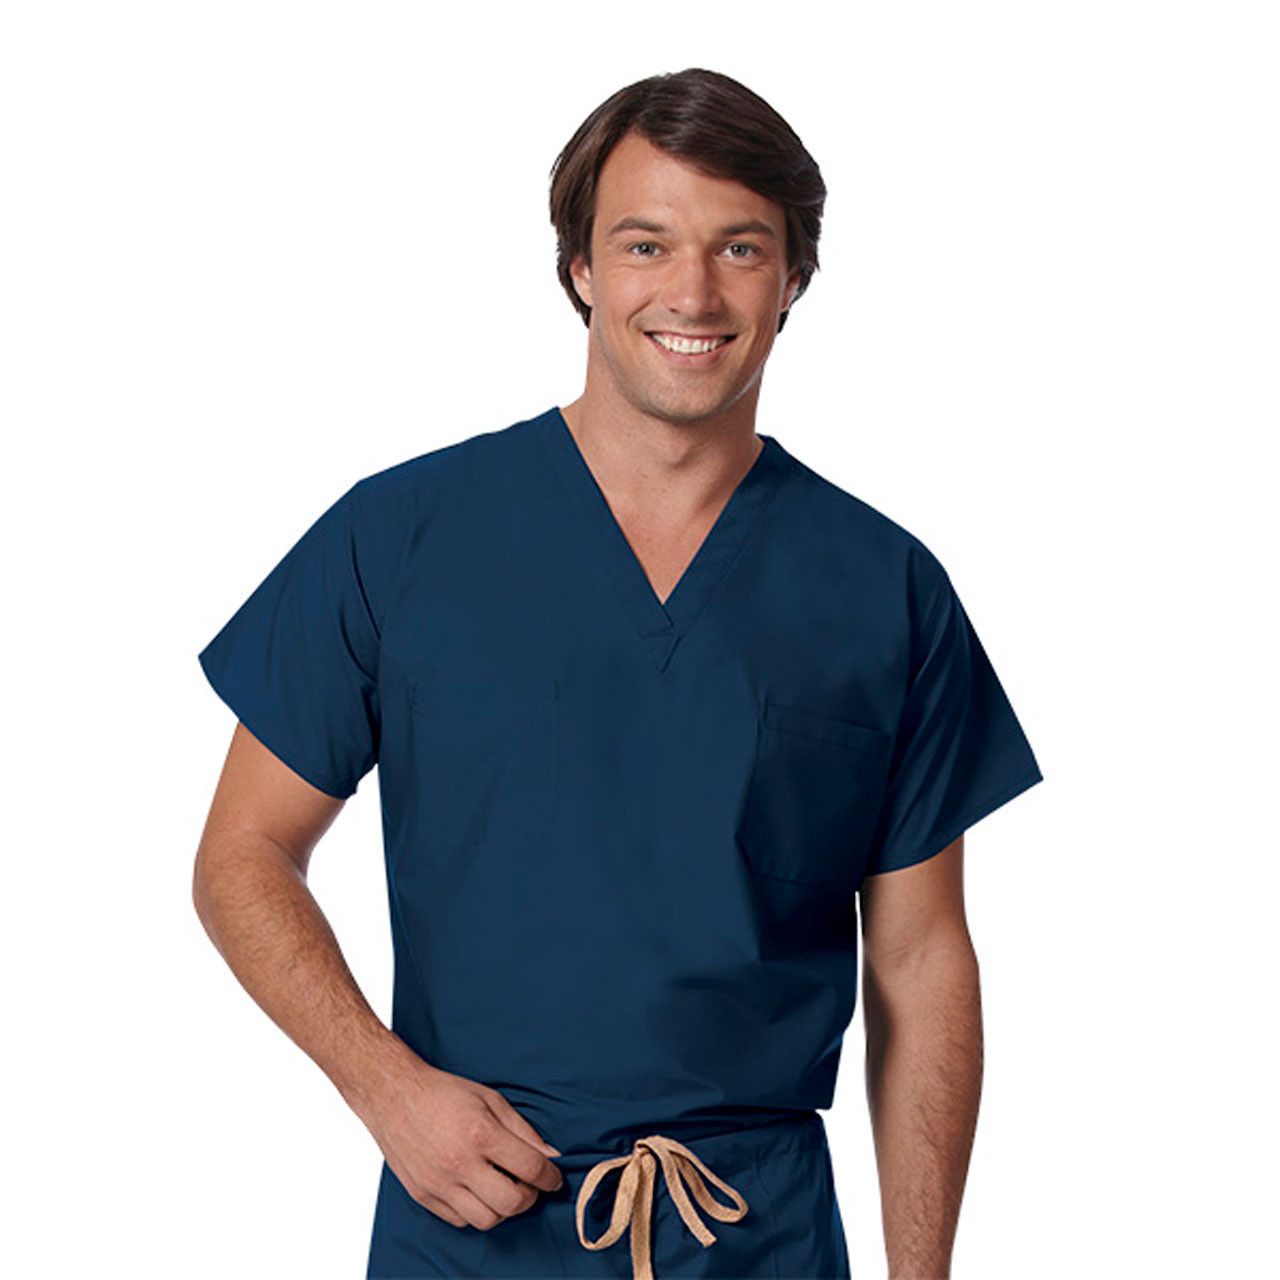 Does the navy surgical scrubs bottom have a pocket?